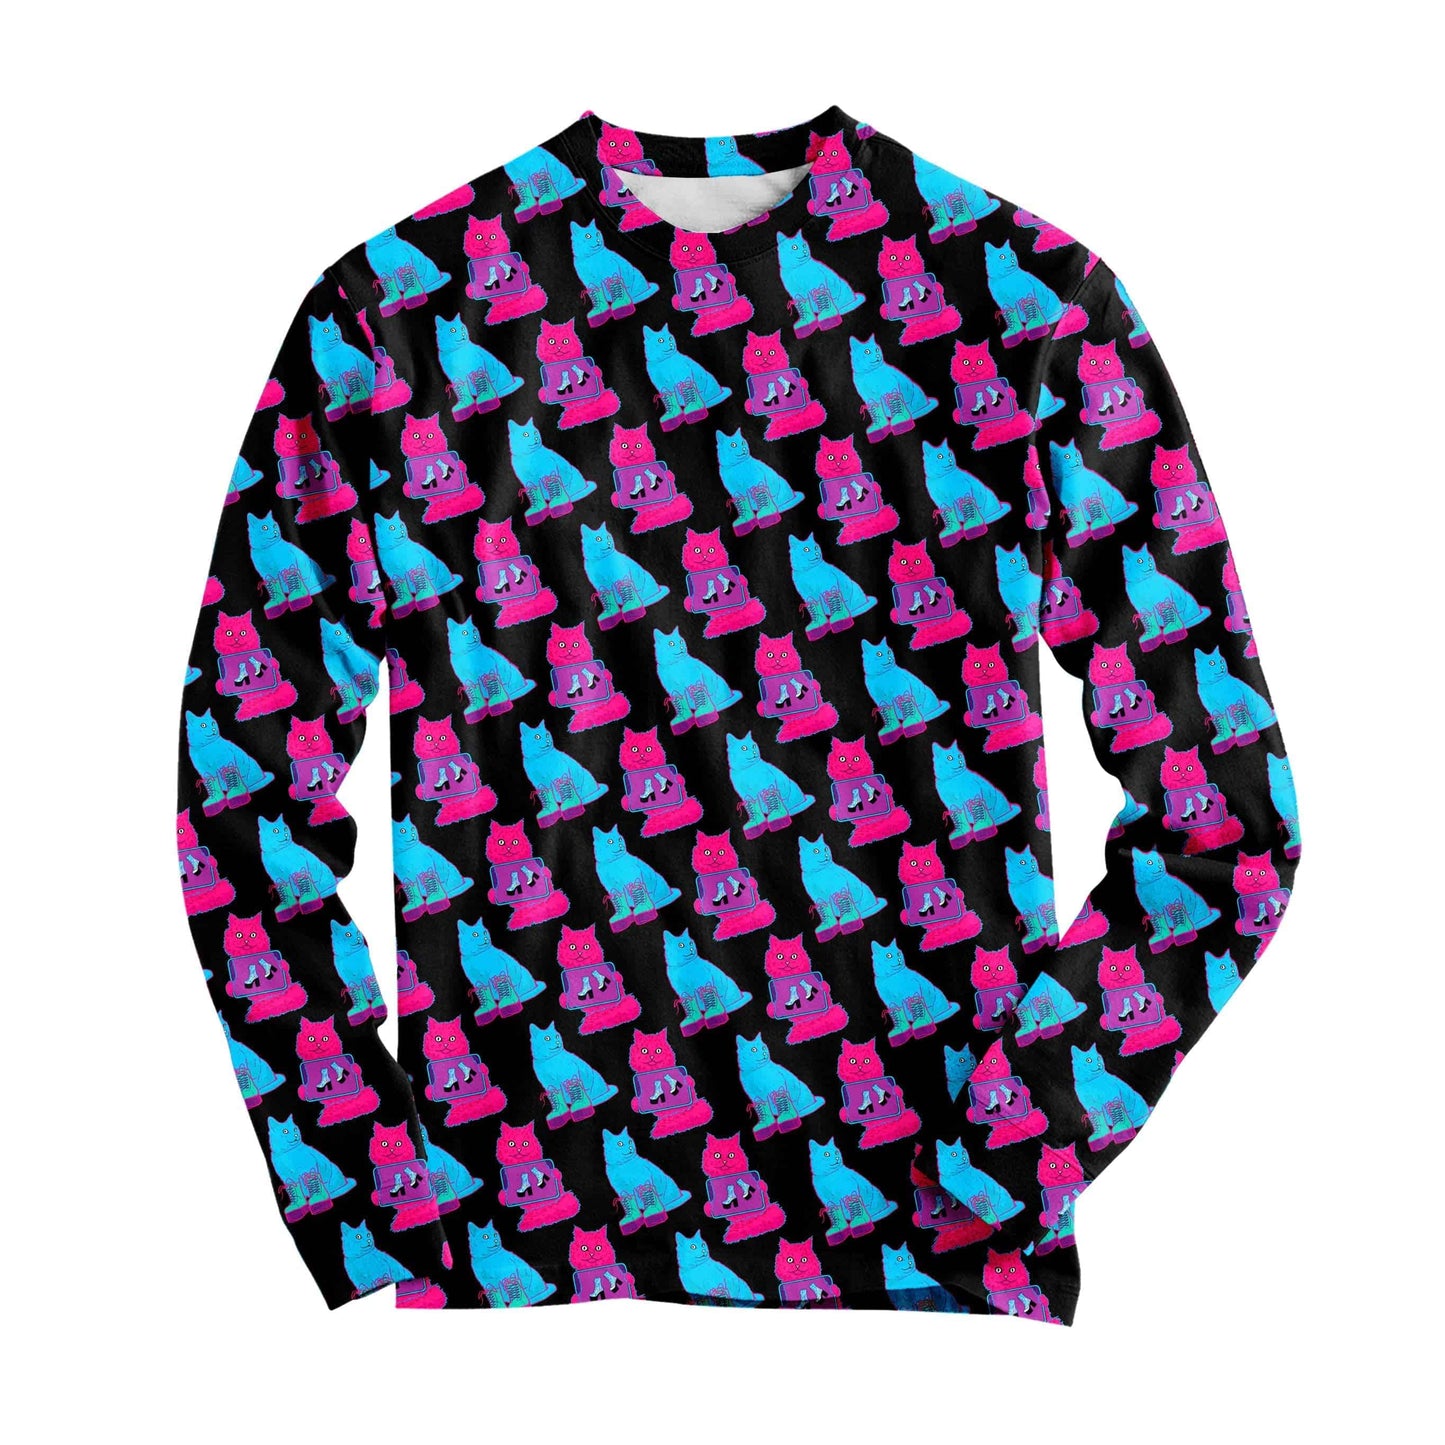 Boots N Cats Long Sleeve, Noctum X Truth, | iEDM